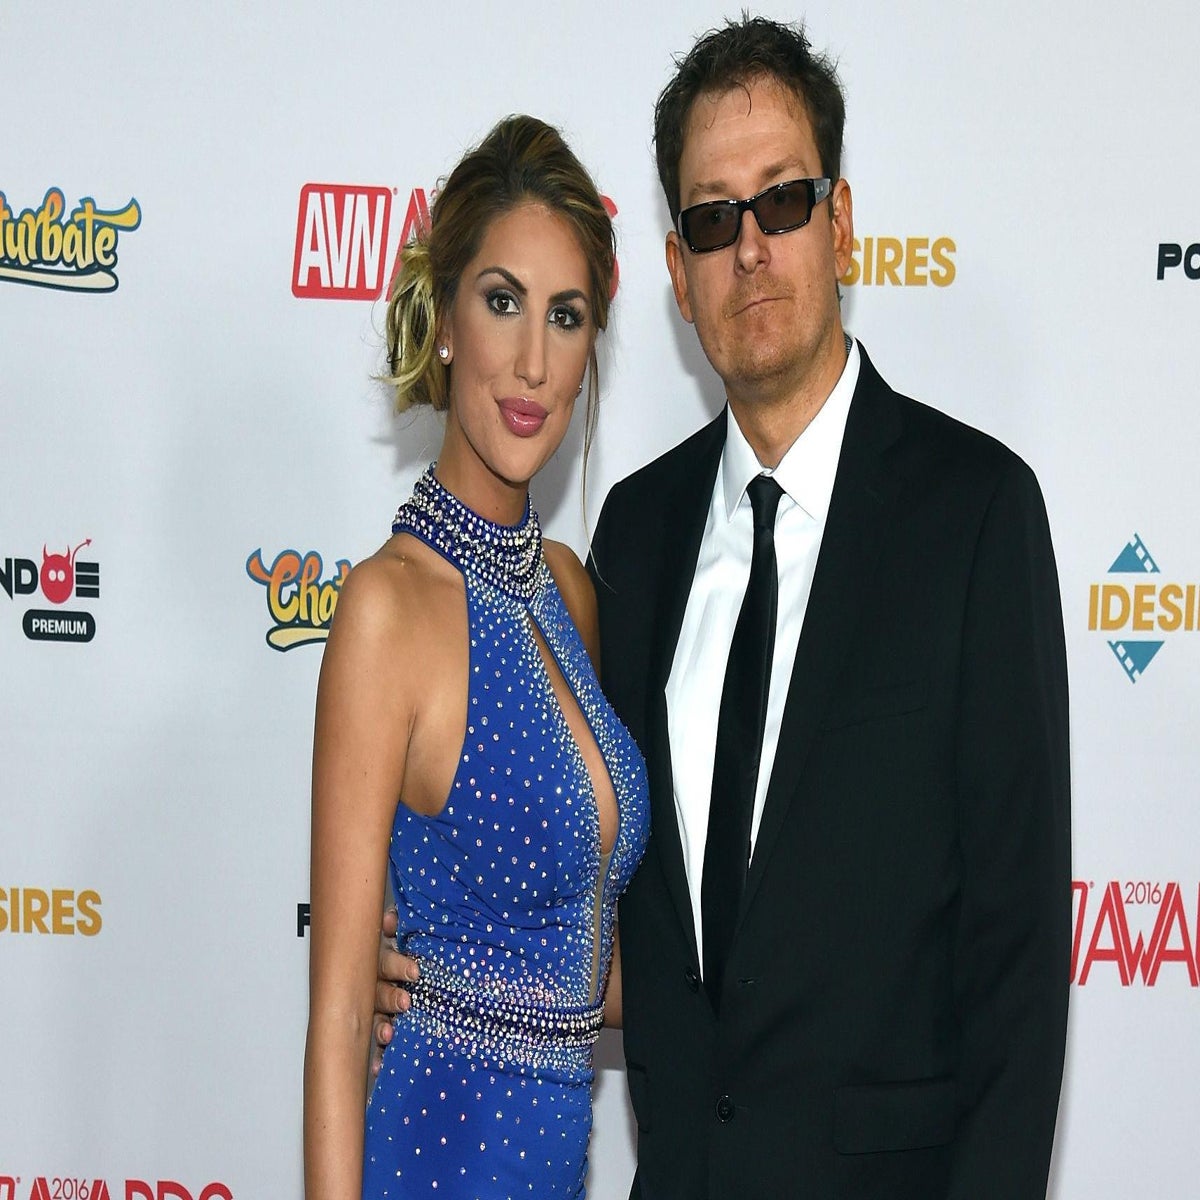 Brazzers Brother Forces Sister - August Ames dead: Adult actor's brother says cyber bullying 'cost my baby  sister's life' | The Independent | The Independent